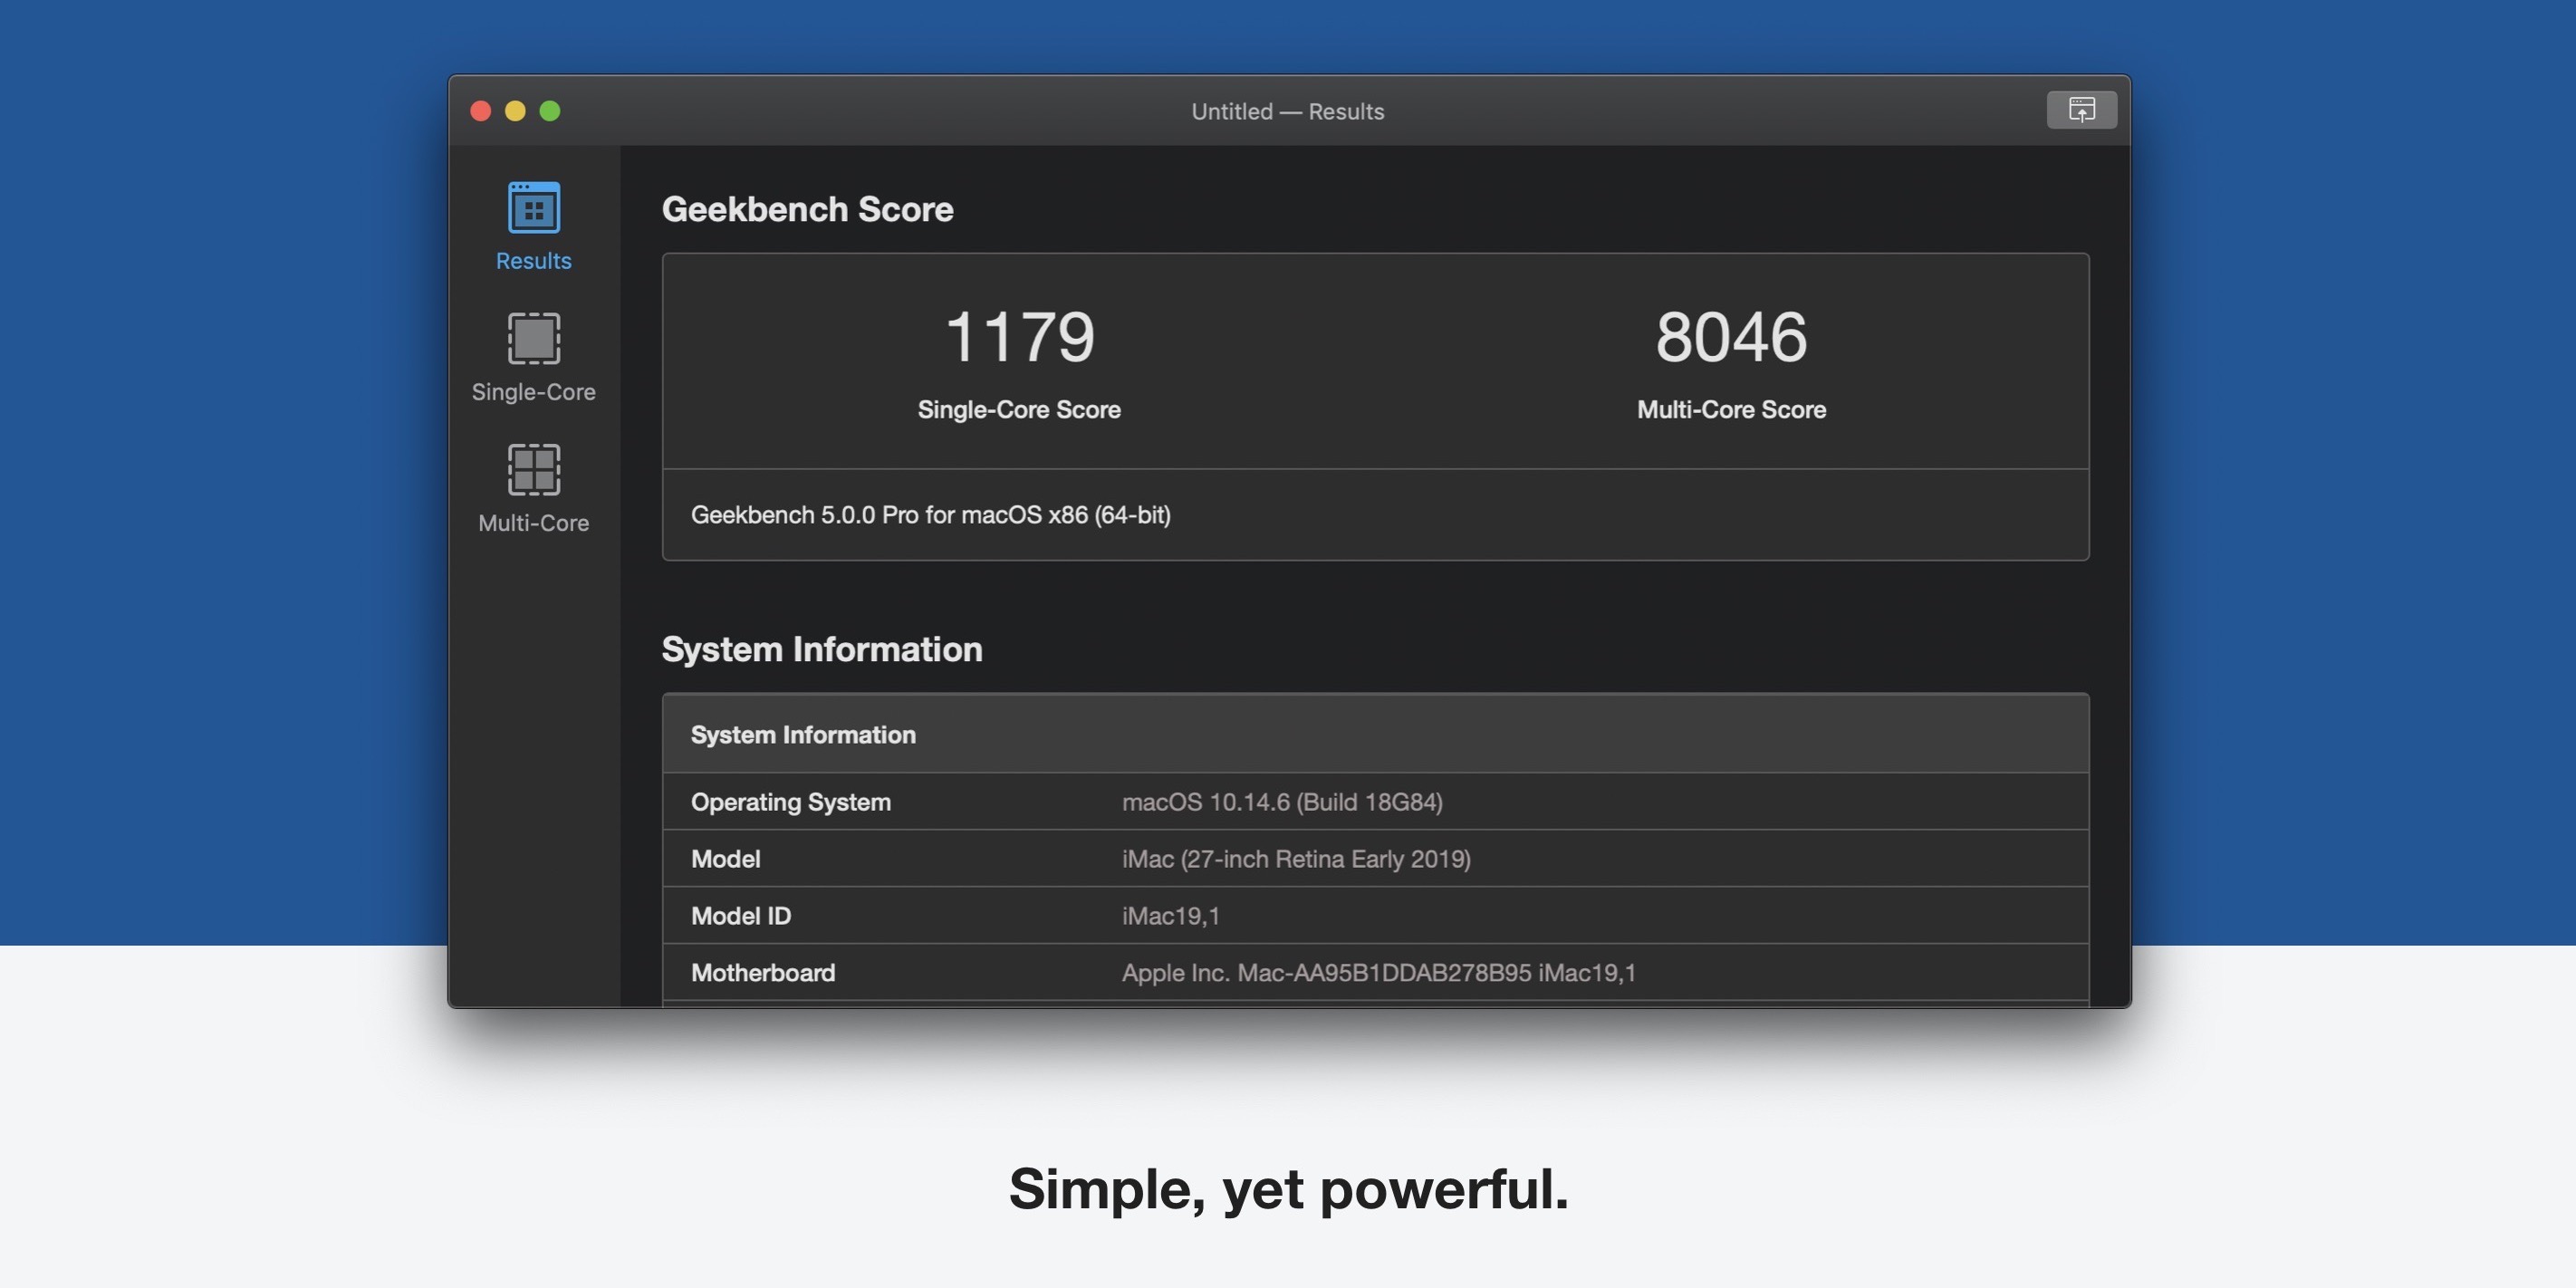 download the last version for apple Geekbench Pro 6.2.2